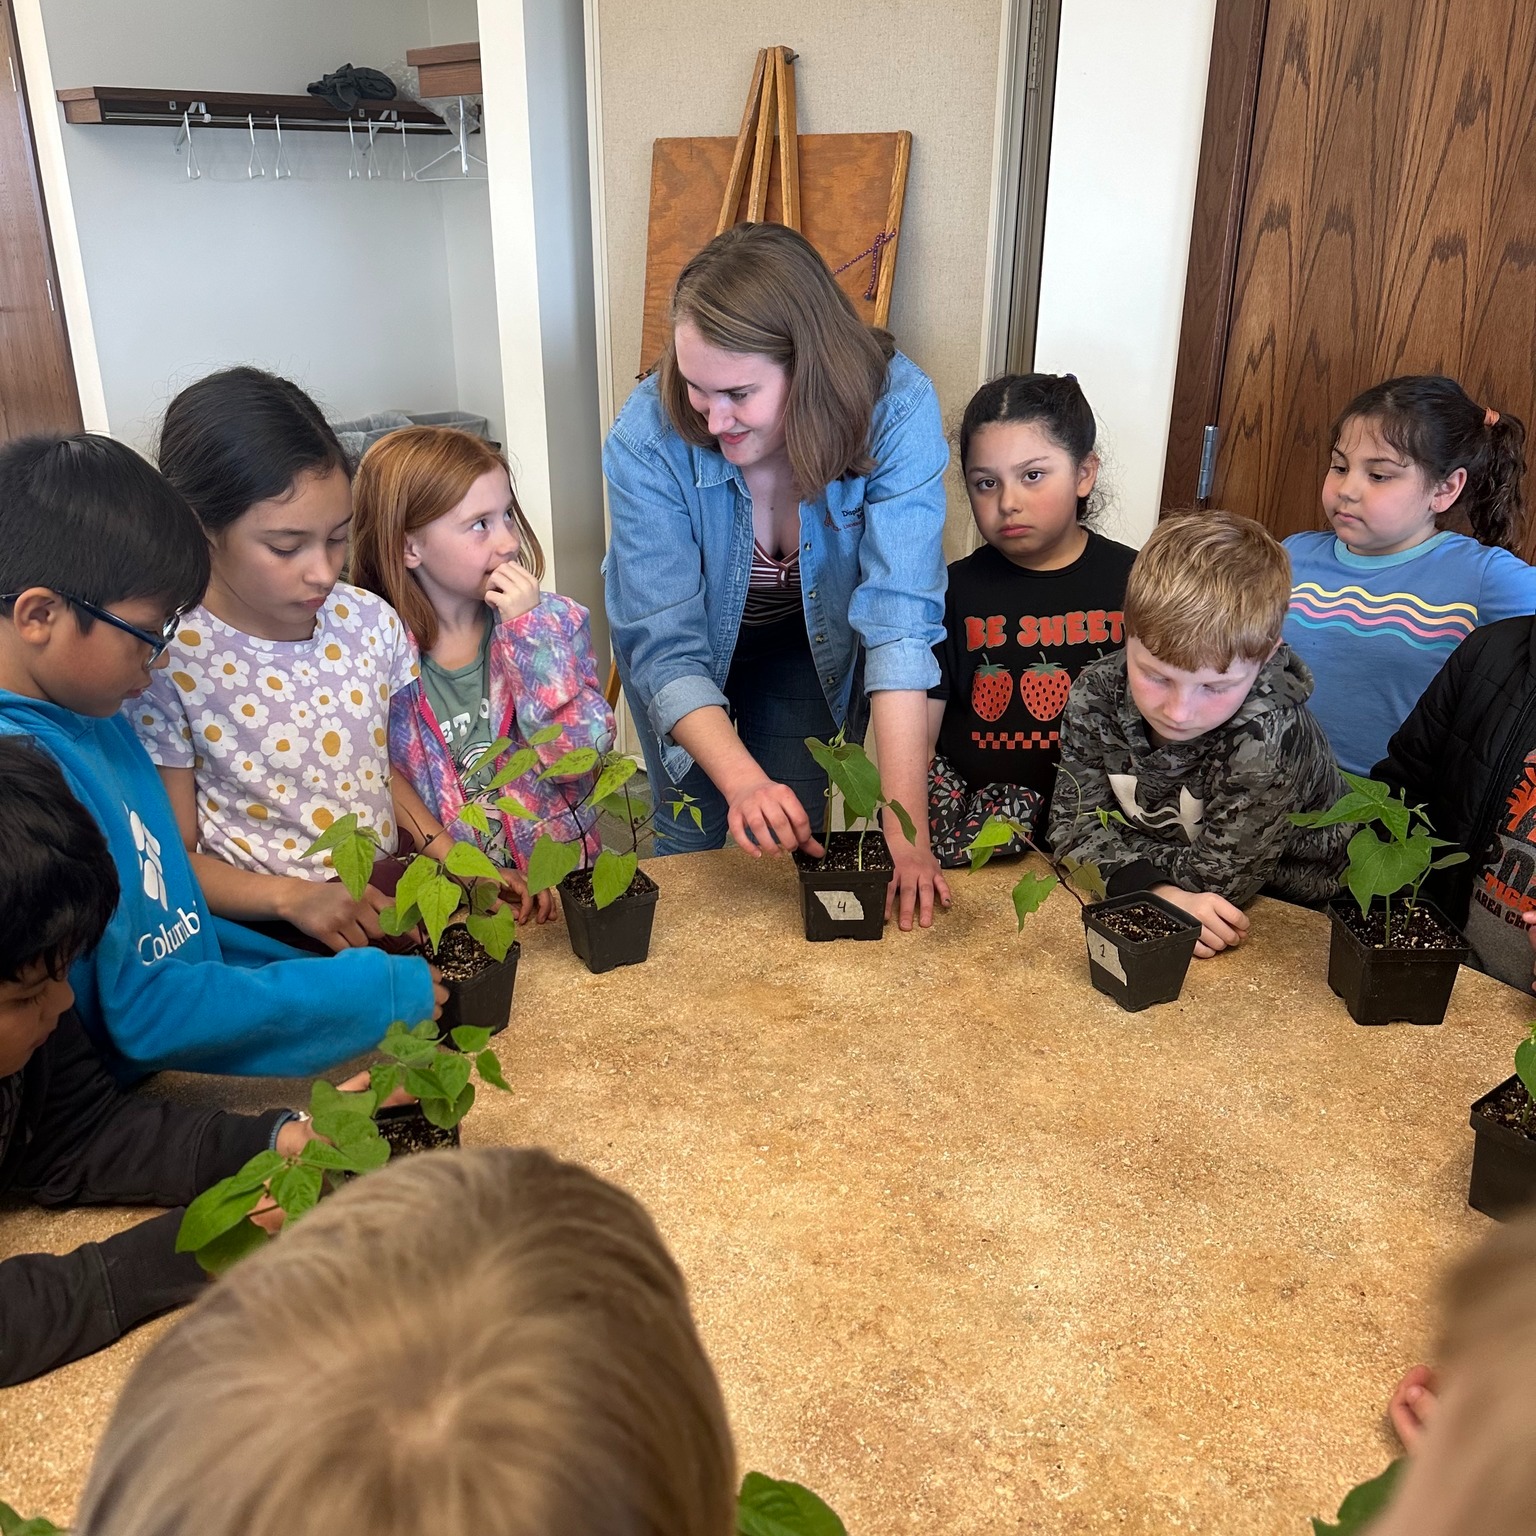 Chloe and several students look at seedlings grown at WCROC.